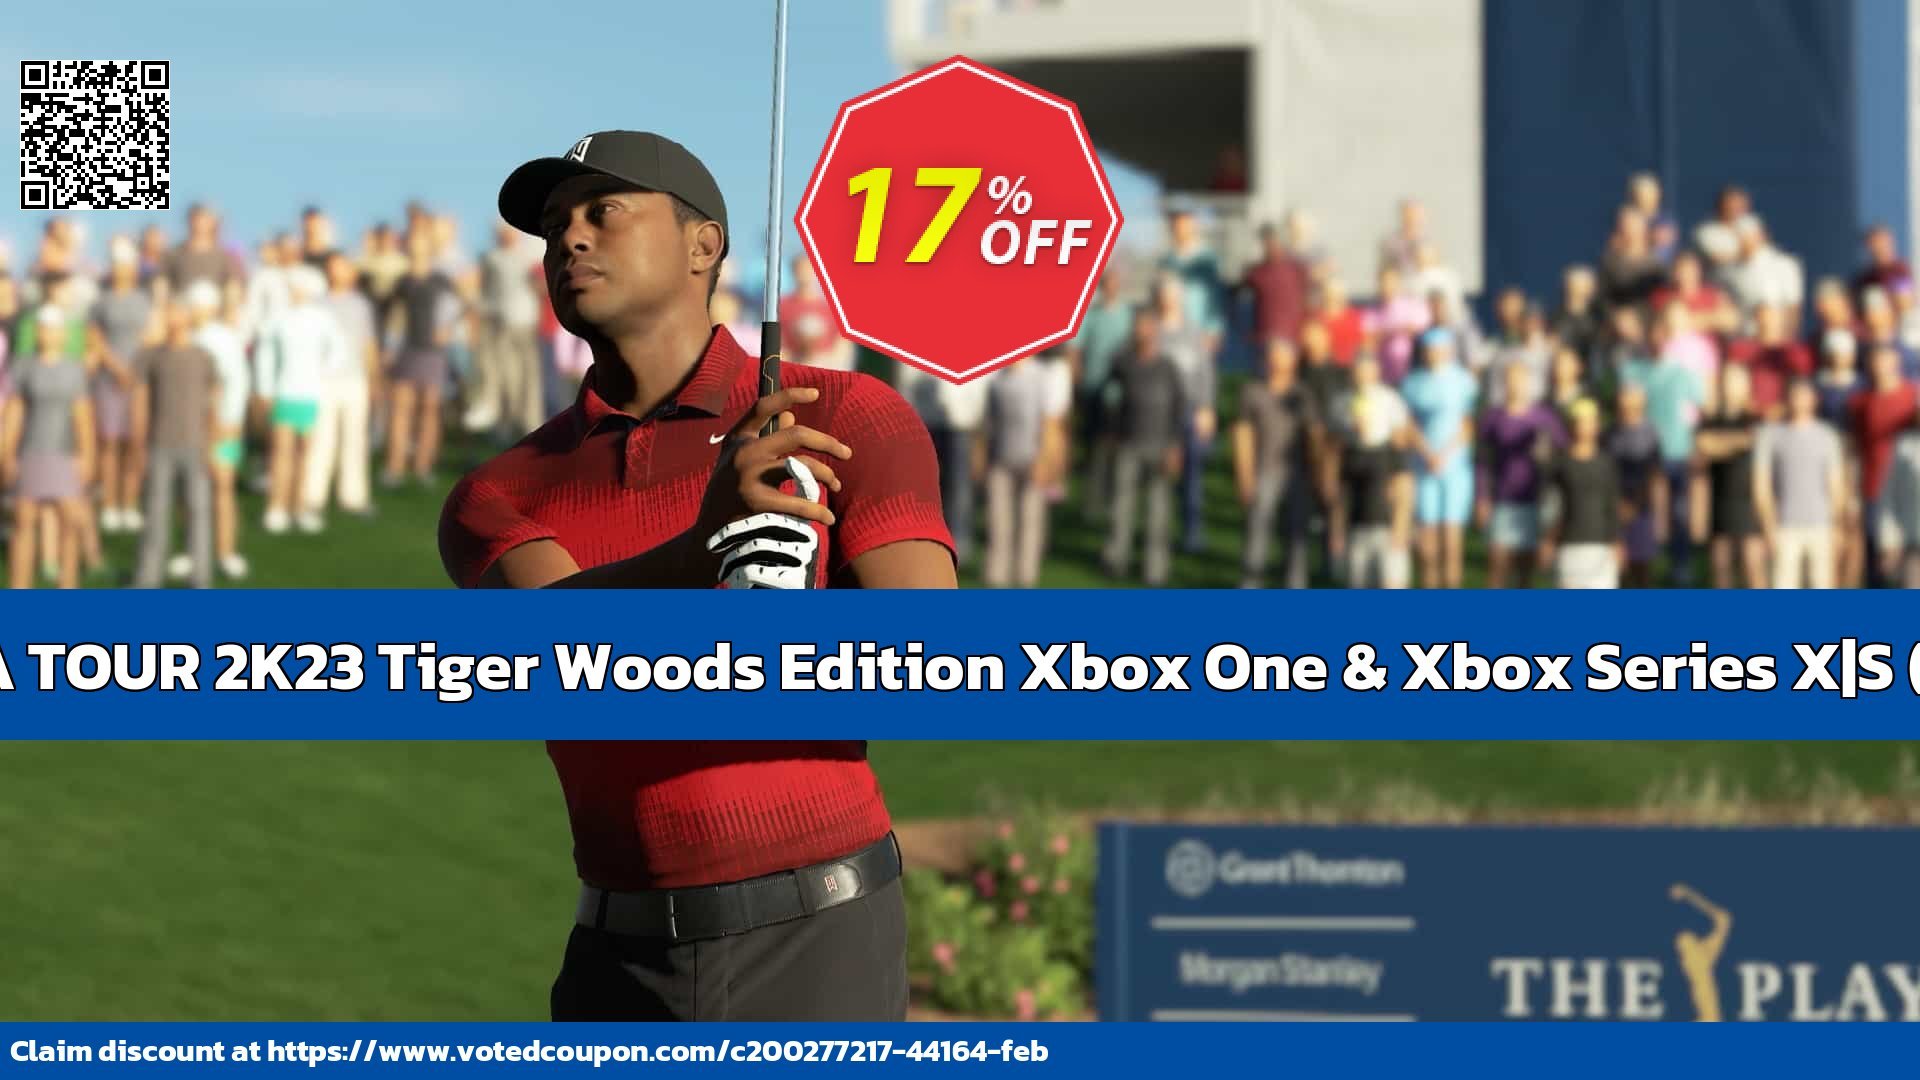 PGA TOUR 2K23 Tiger Woods Edition Xbox One & Xbox Series X|S, US  voted-on promotion codes